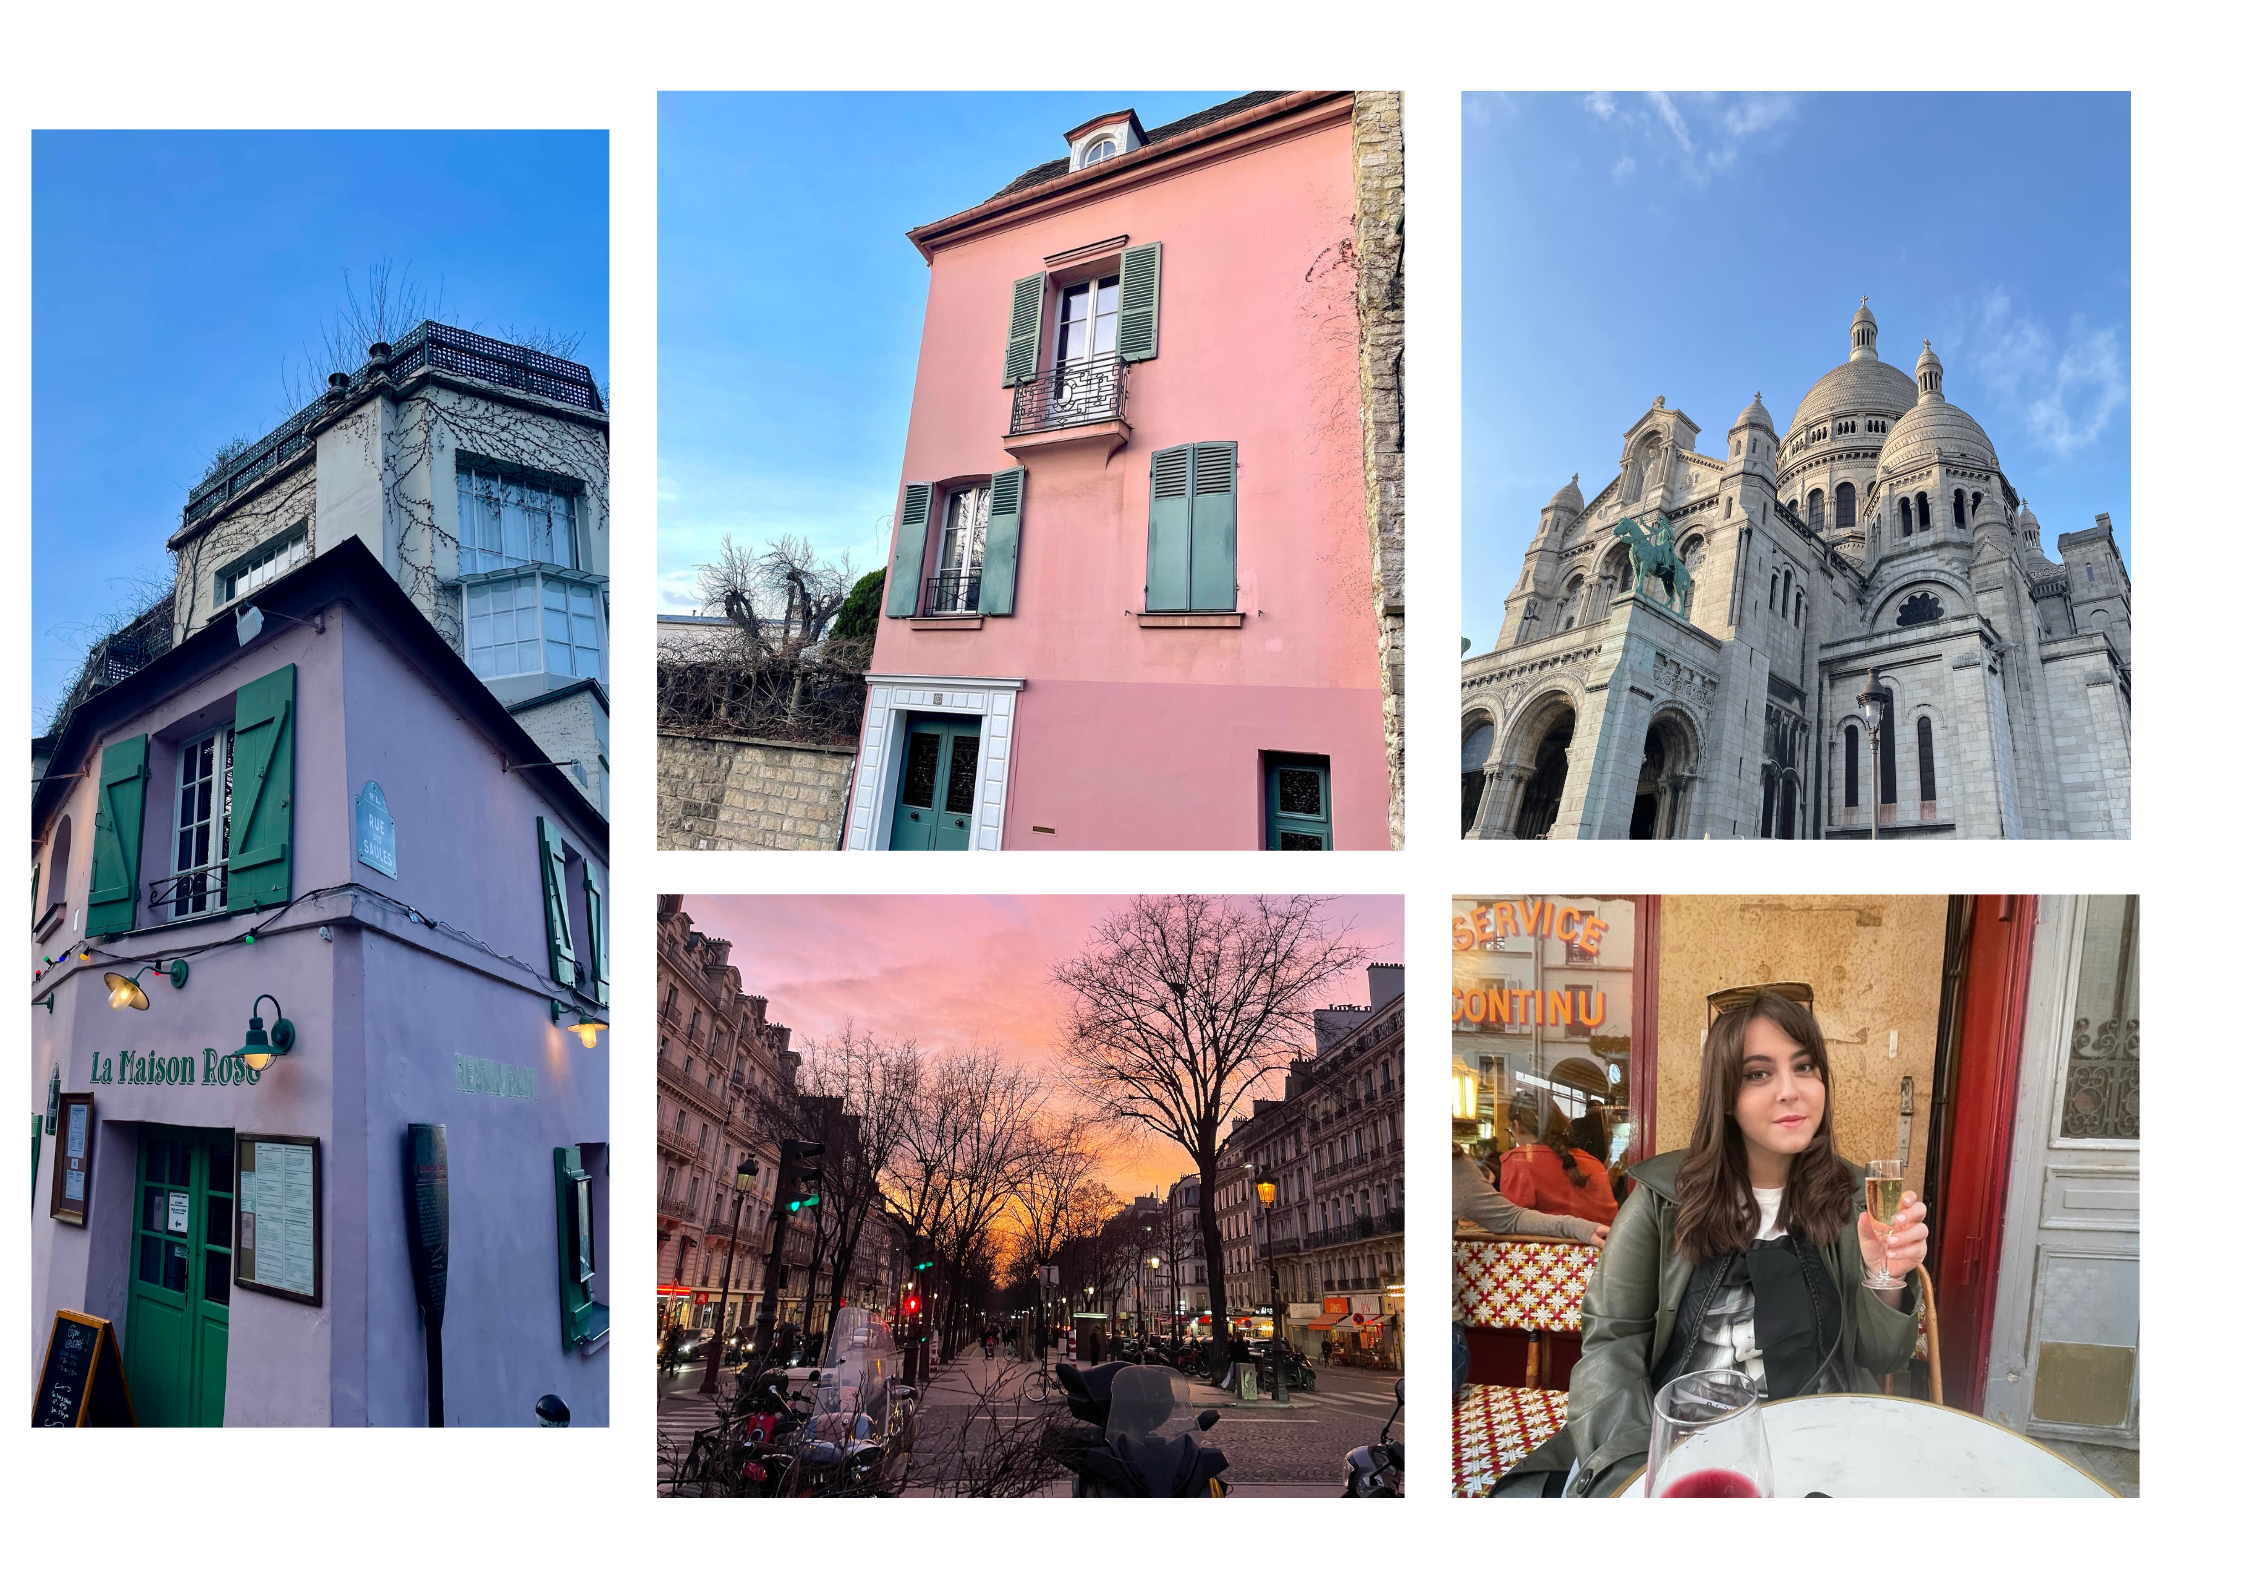 How to spend the day in Montmartre, Paris